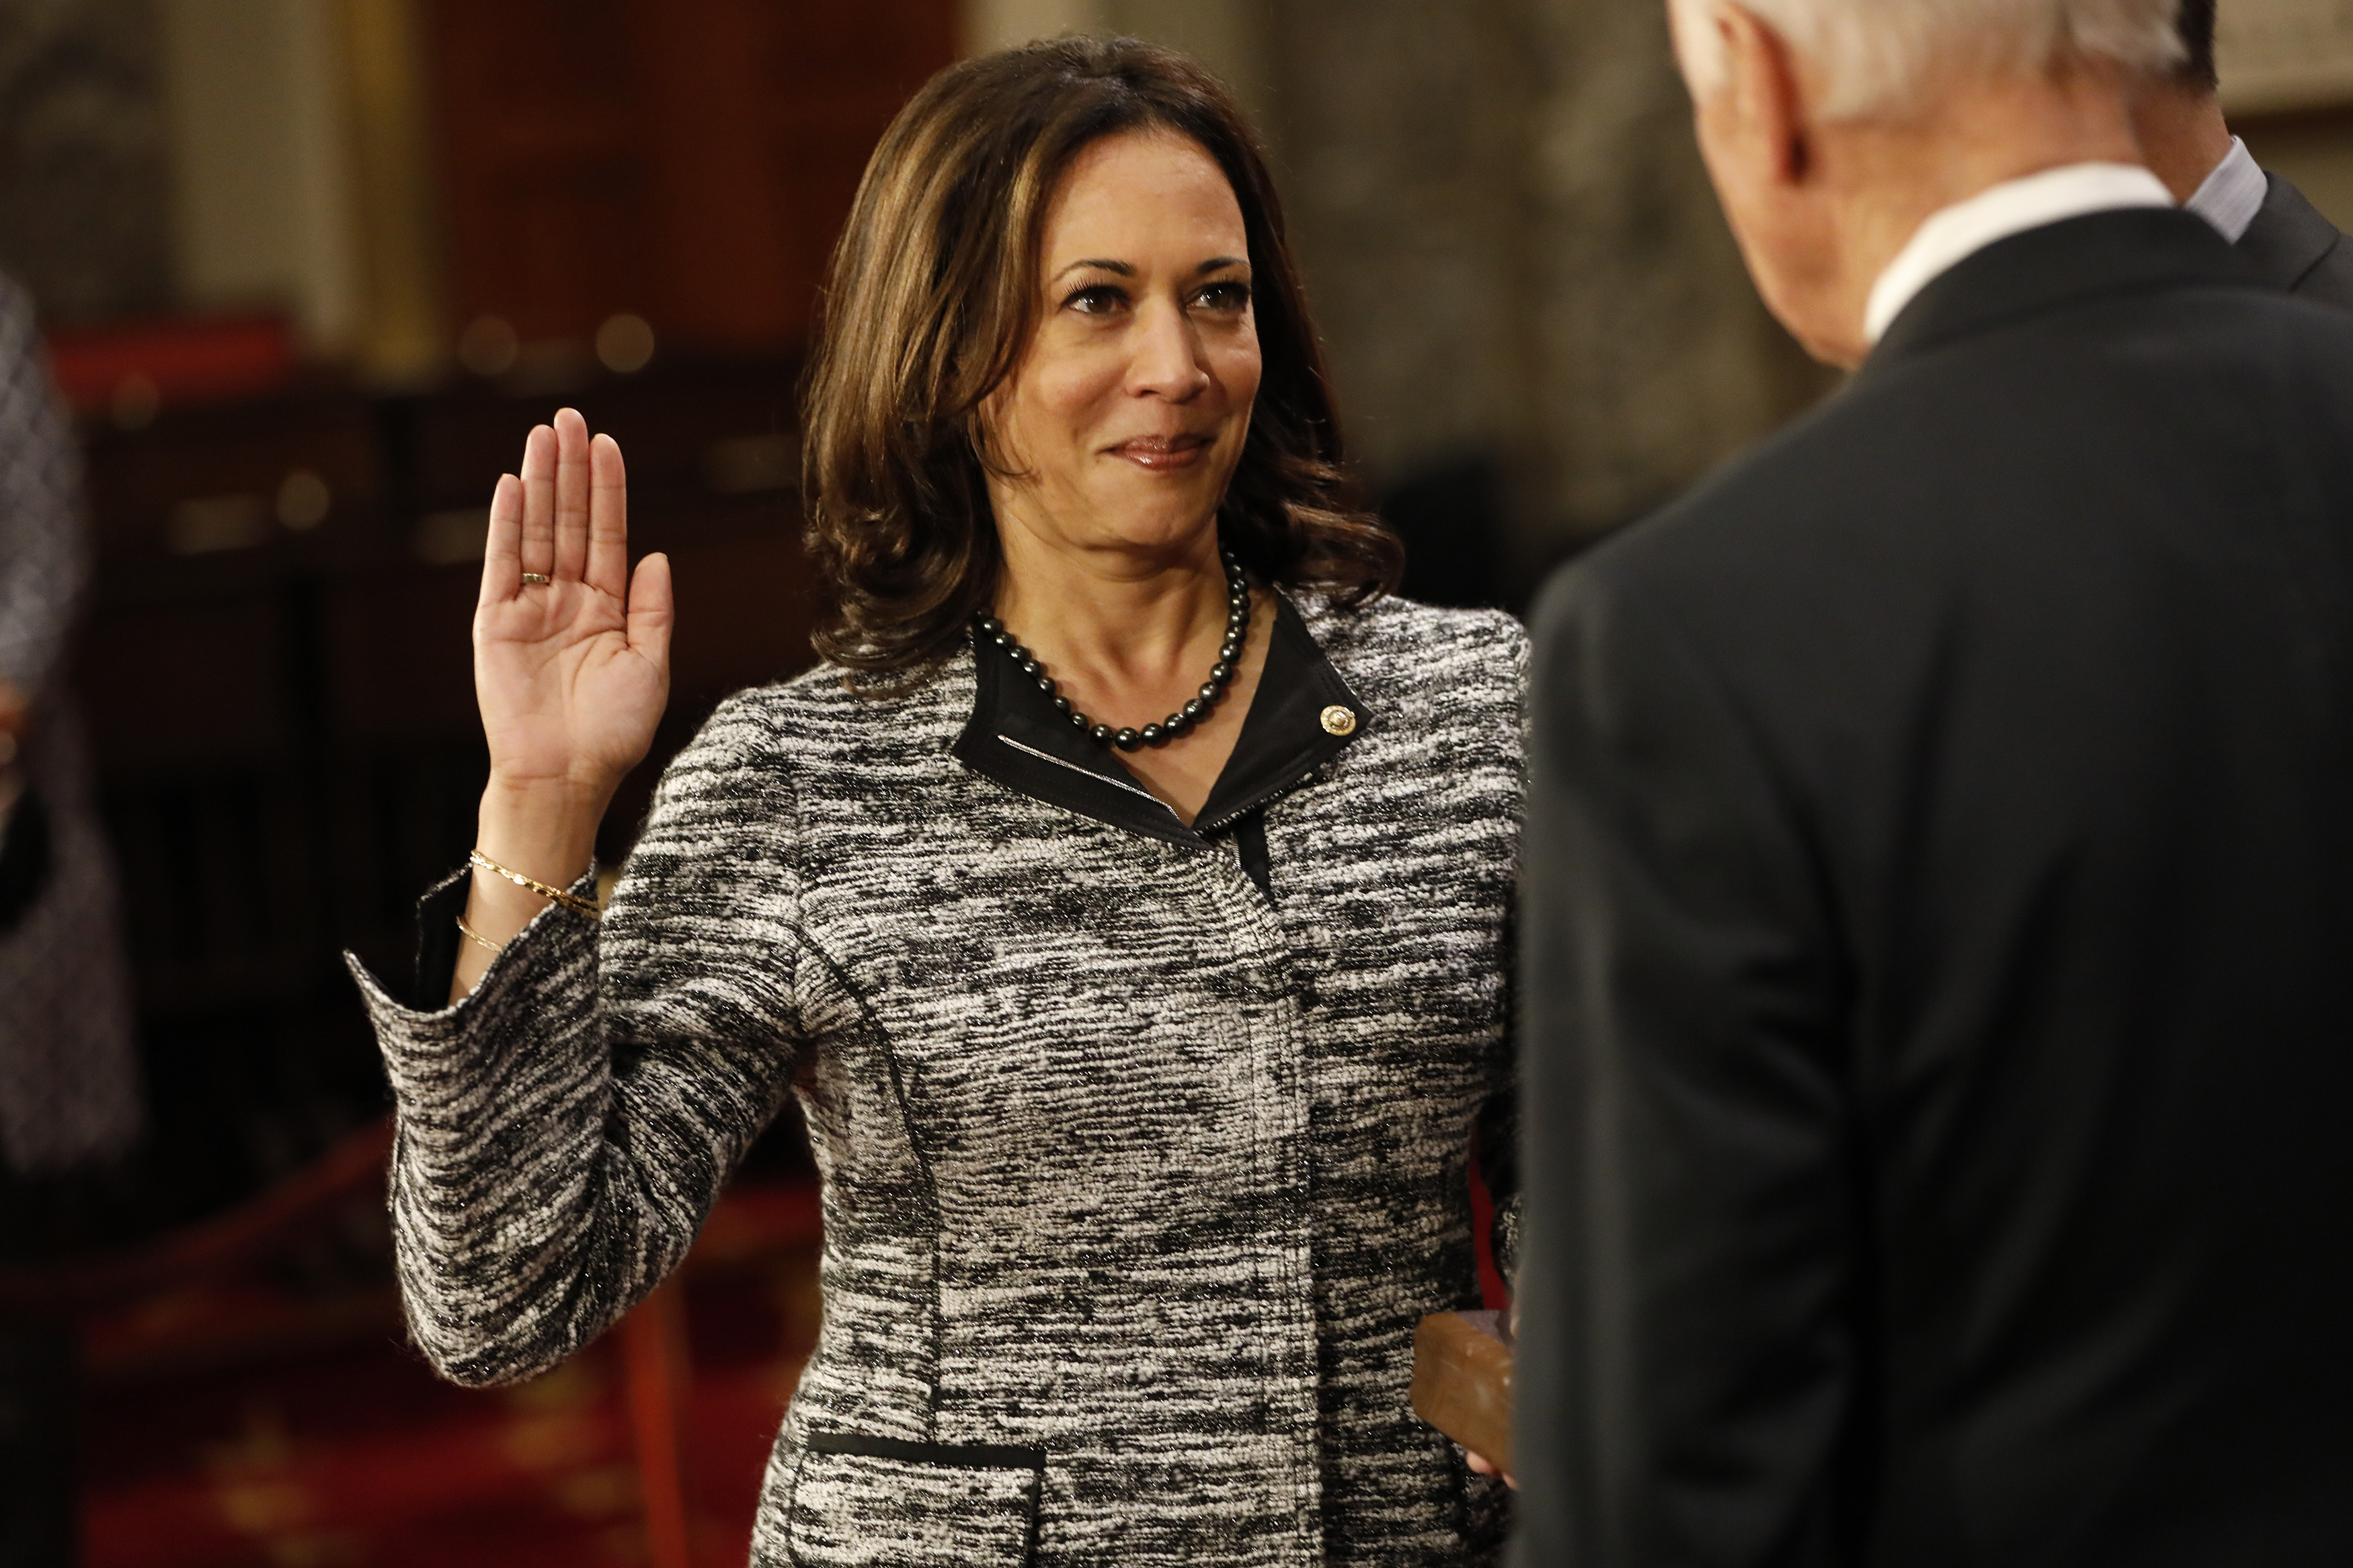 Vice President Swears In Members Of The 115th Congress